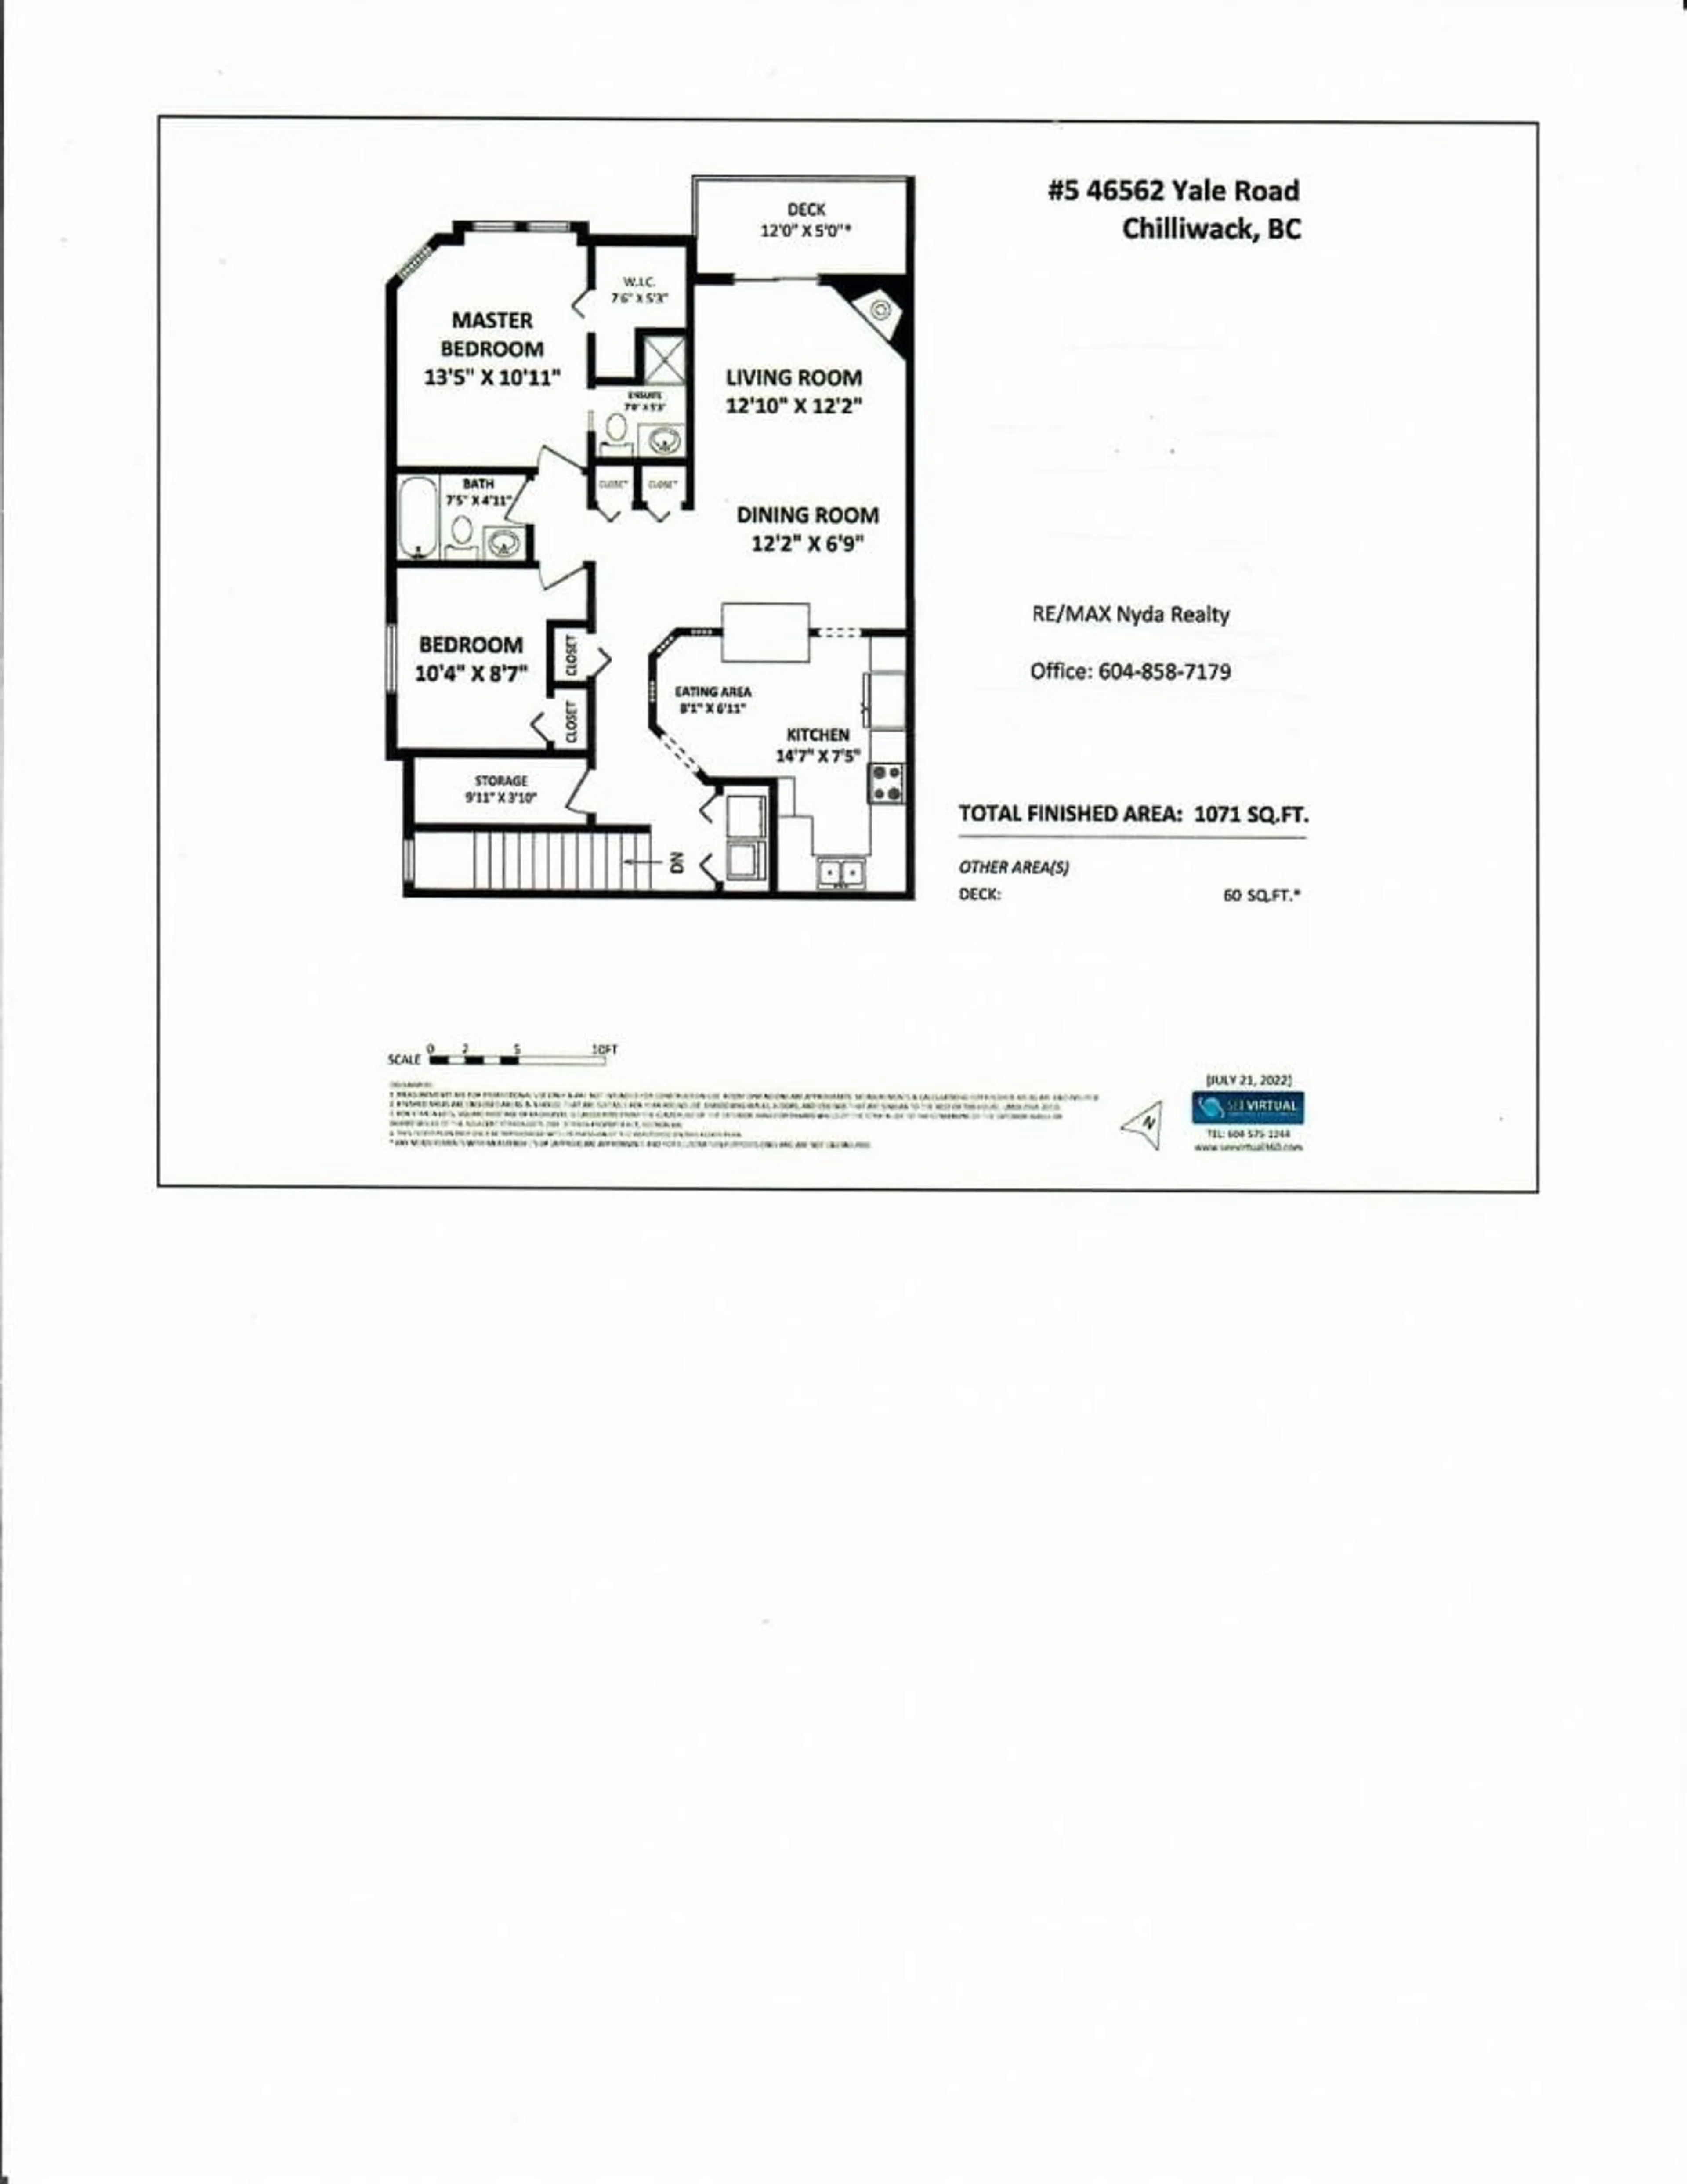 Floor plan for 5 46562 YALE ROAD, Chilliwack British Columbia V2P2R5